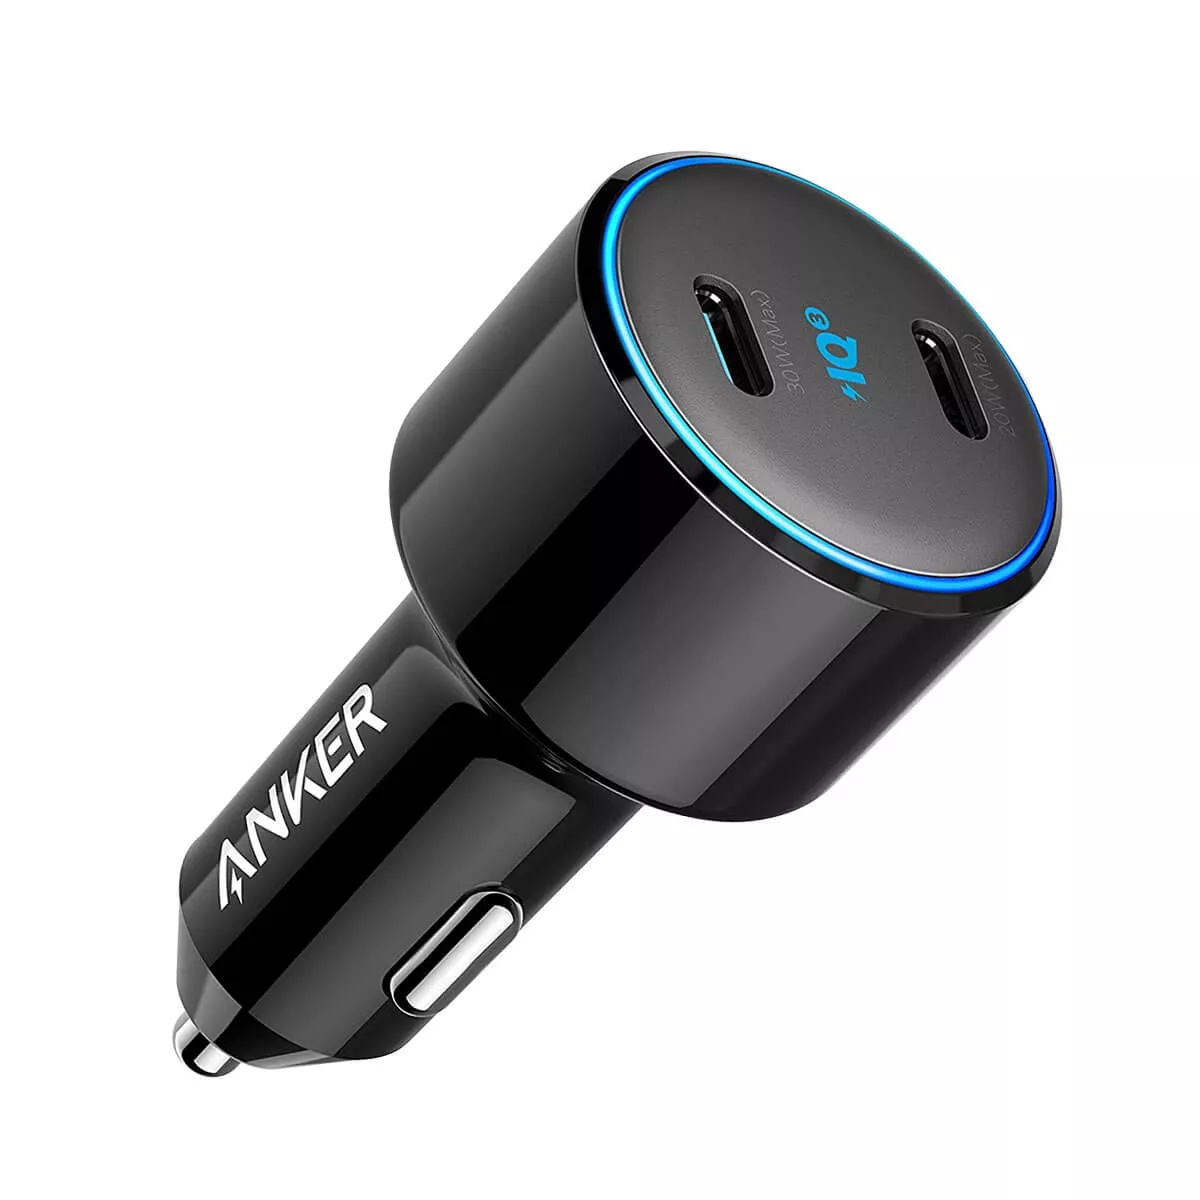 Anker PowerDrive+ III Duo 48W Car Charger with 2 USB-C PowerIQ 3.0 Ports -  Black - Anker Kuwait